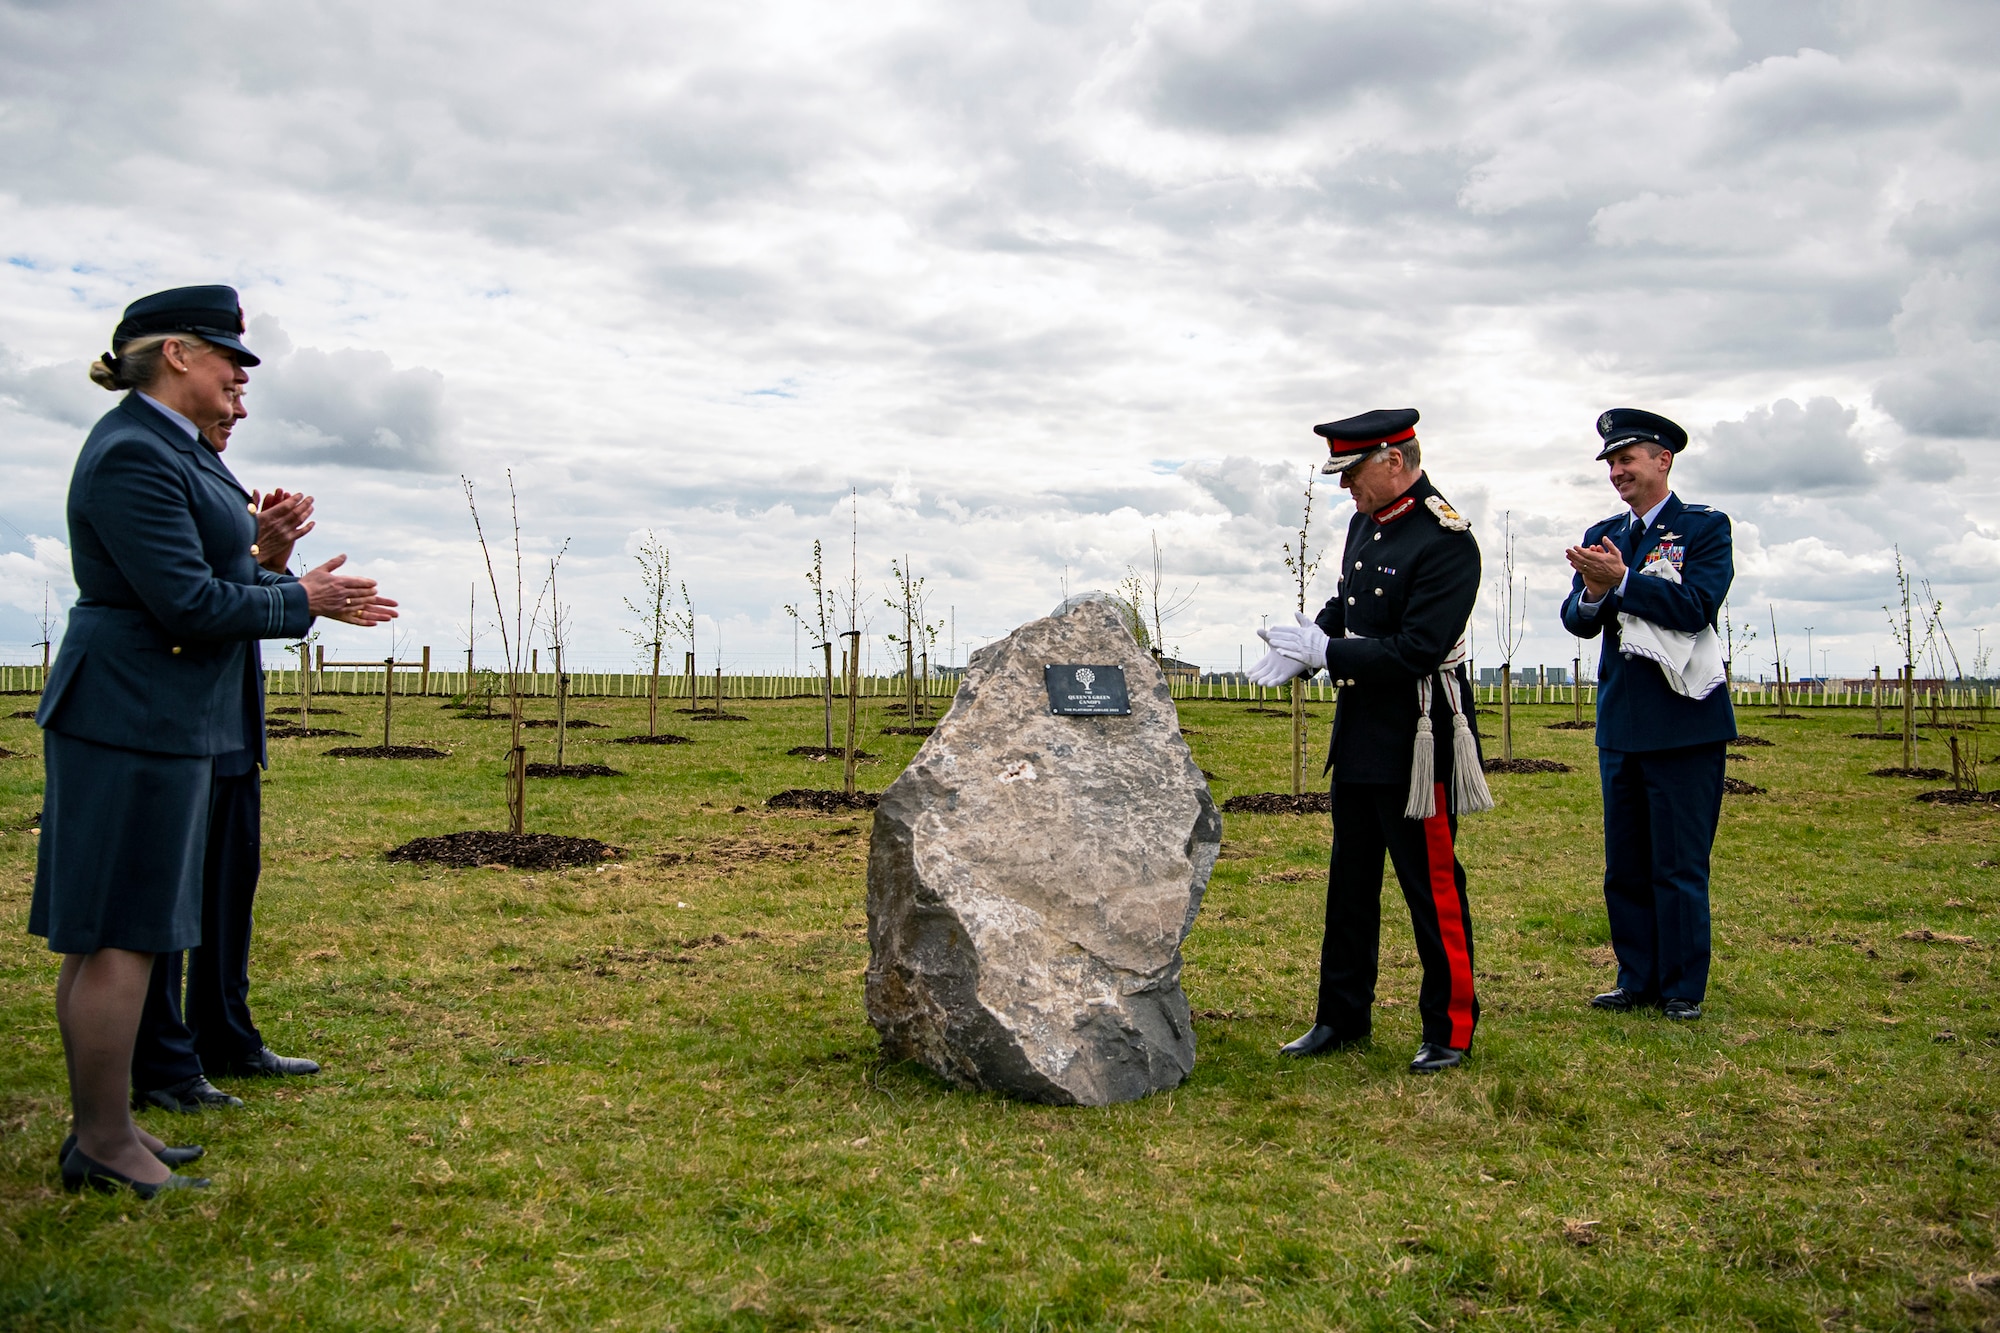 U.S. Air Force Col. Jon T. Hannah, right, 422d Air Base Group commander, James Saunders-Watson, center right, Lord-Lieutenant of Northamptonshire and other distinguished guests applaud after the unveiling of a stone commemorating the Queen’s Green Canopy event at RAF Croughton, England, April 13, 2022. The event celebrated the Queen’s Platinum Jubilee initiative, marking the 70th year of her reign. During the event, trees were planted to create a legacy in honor of the queen’s leadership of the nation. (U.S. Air Force photo by Staff Sgt. Eugene Oliver)